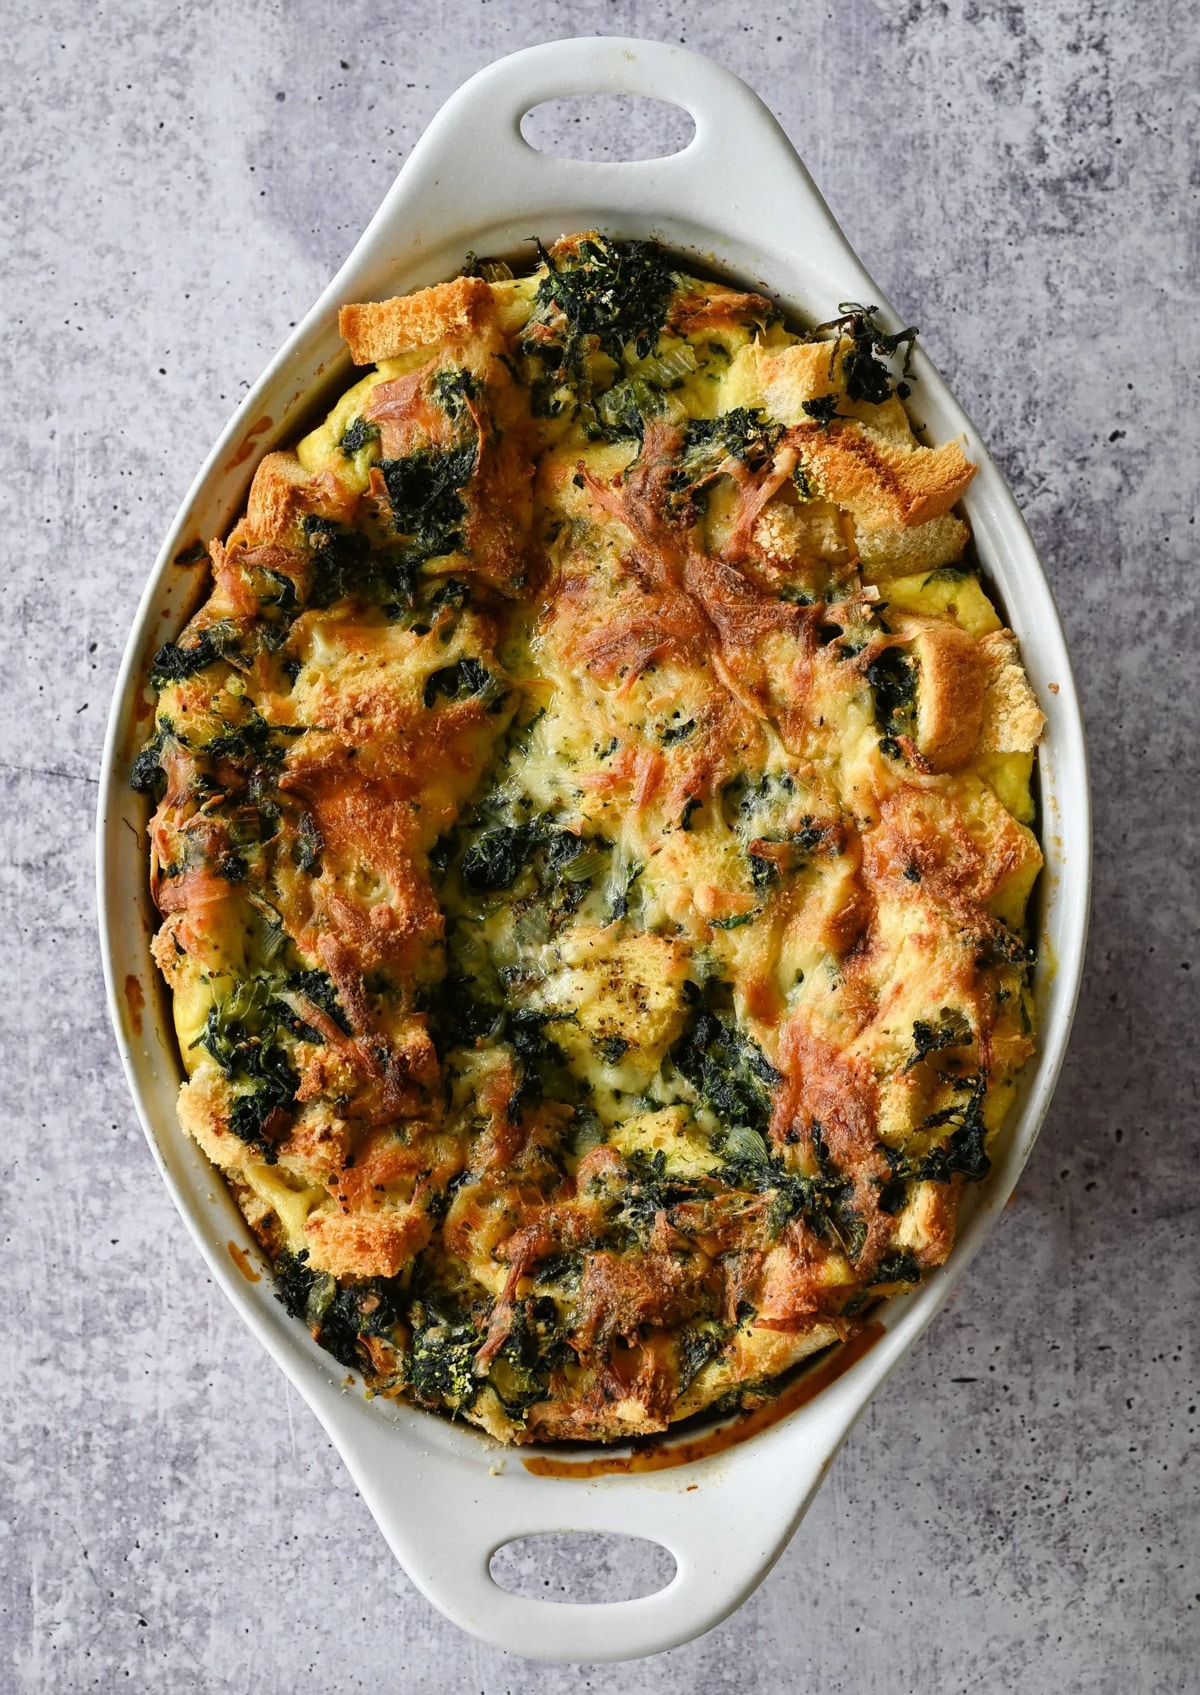 Spinach and cheese strata